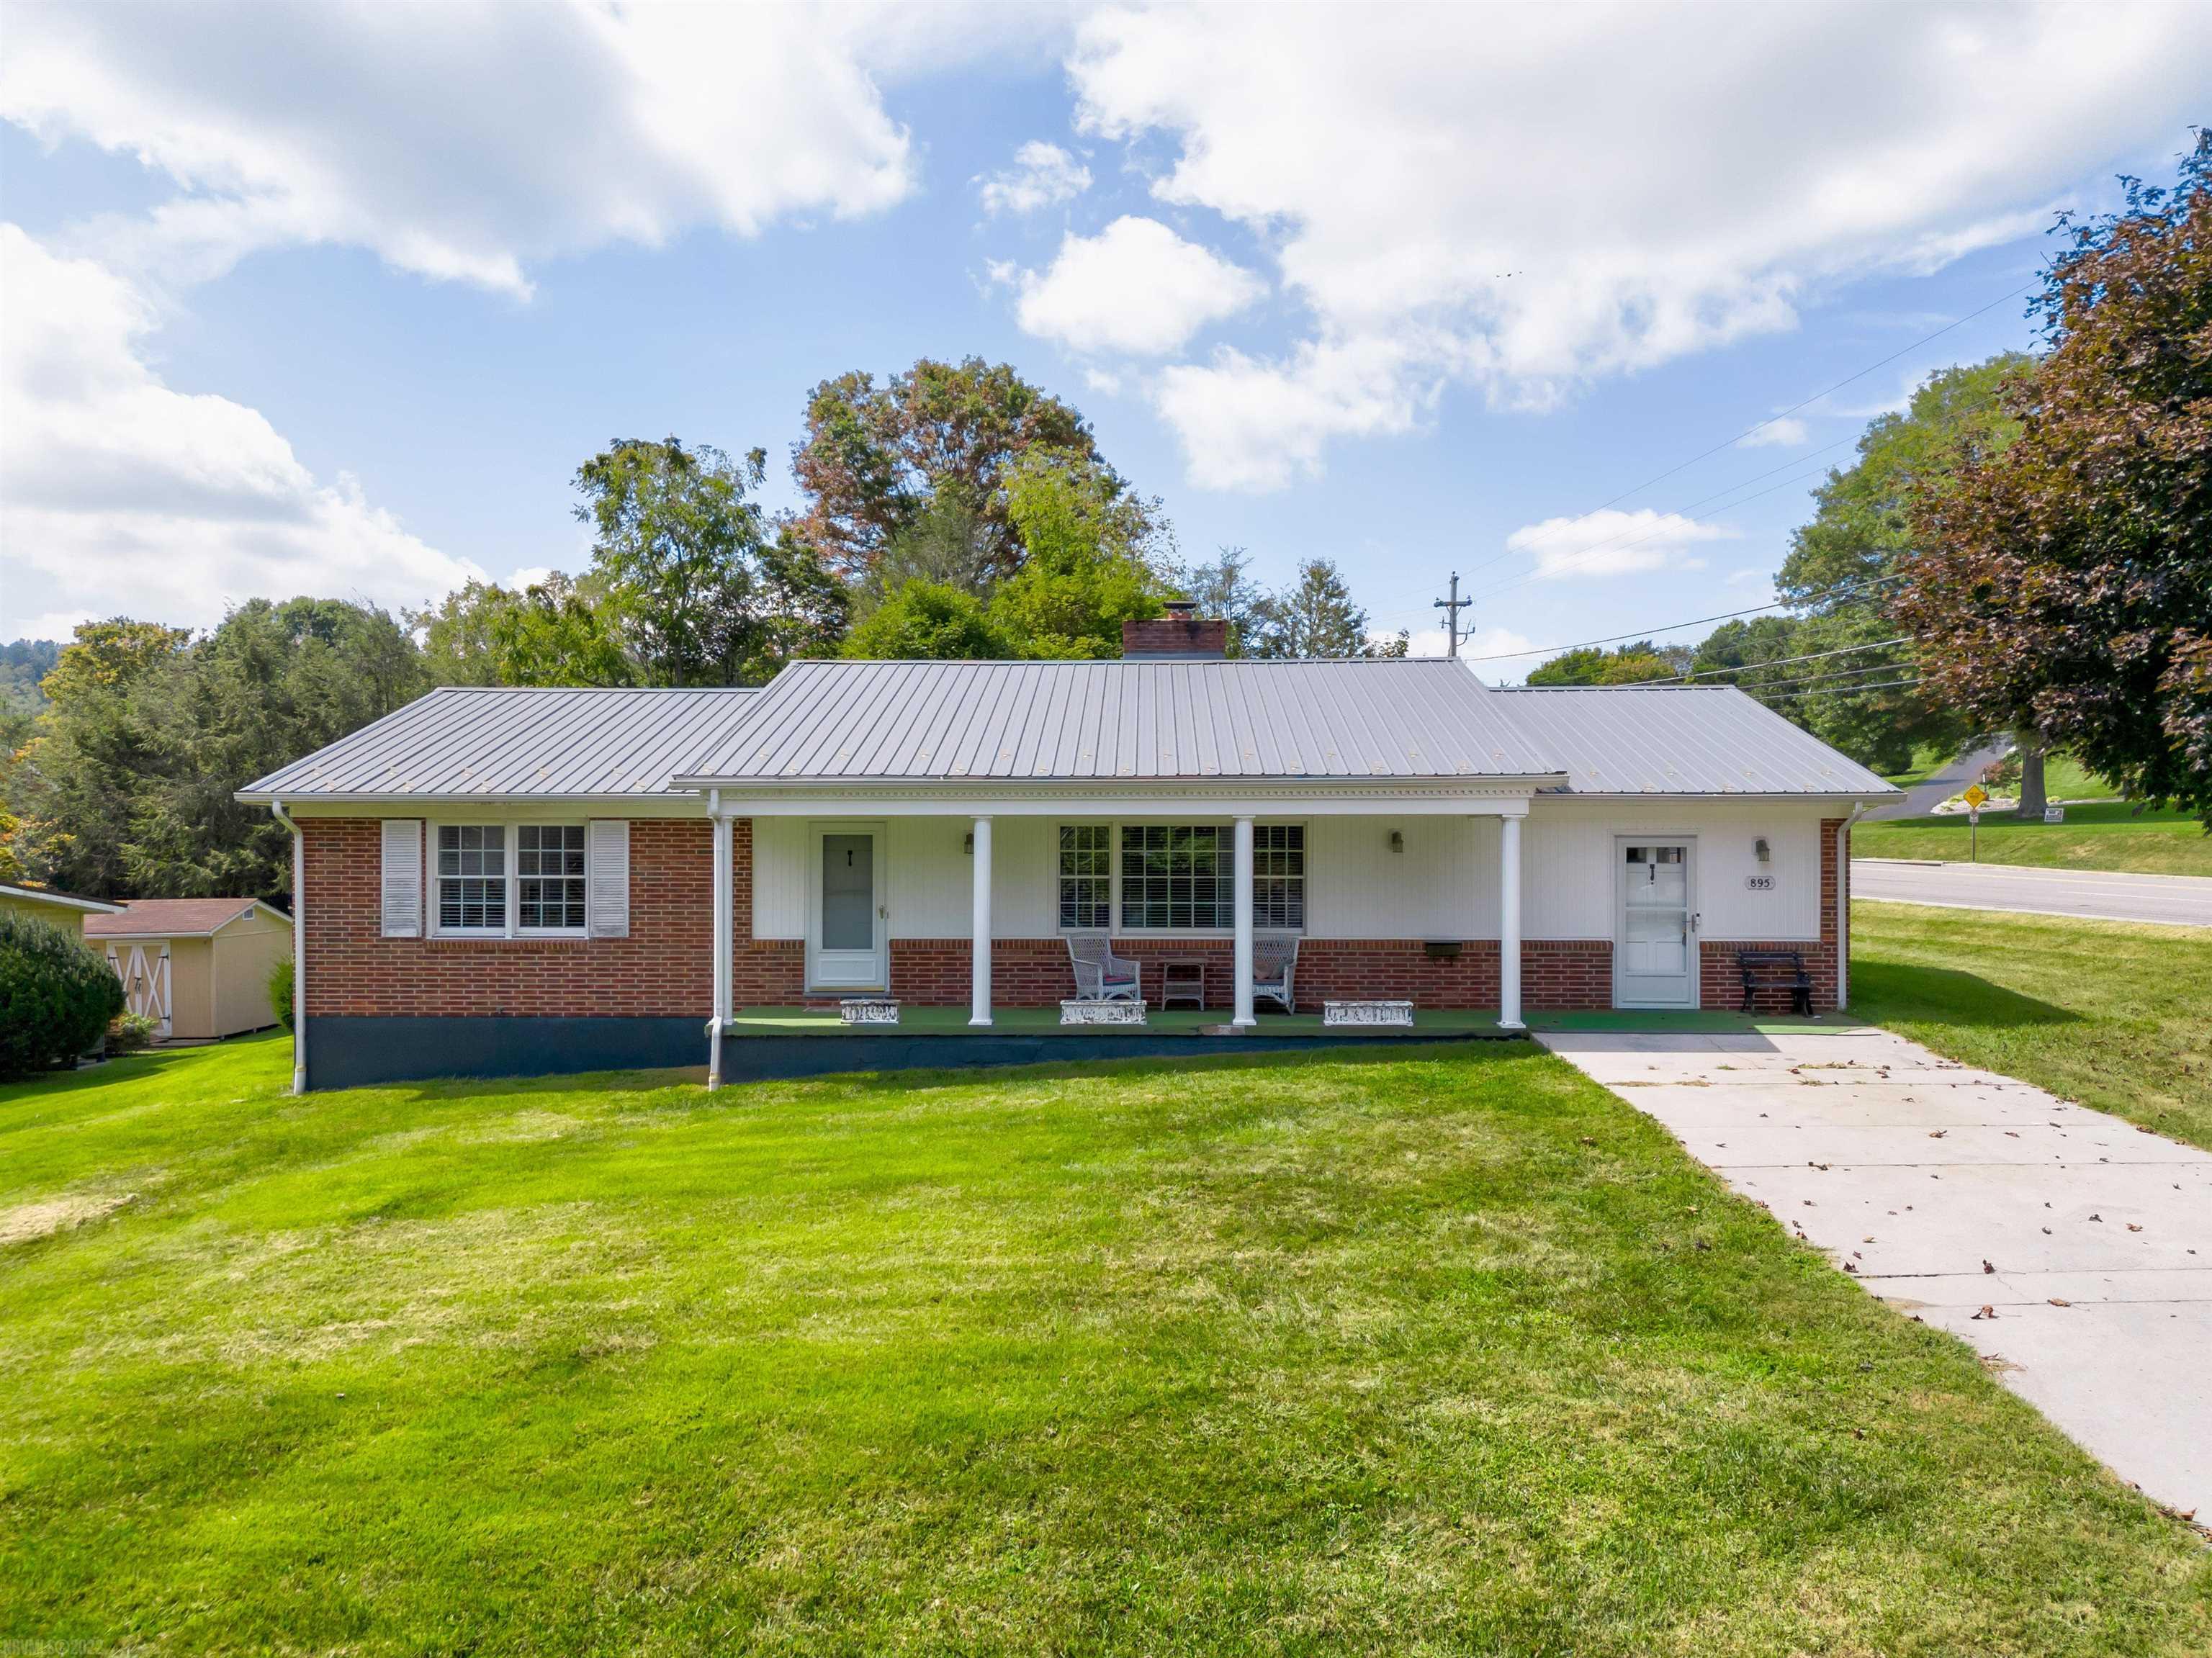 OPEN HOUSE: Saturday October 1st 11:00 am-1:00 pm. Ready for convenience to restaurants, shopping and the interstate while feeling like you are away from everything? This beautiful brick ranch style home fits exactly that with the bonus of one floor living. in addition to a nice sunroom, dining room, kitchen, and living room the first floor provides three bedrooms, two full bathrooms and laundry on the main floor. Maintenance free metal roof, heat pump and water heater recently replaced. Off street parking in front and behind the house. Enjoy sitting on the covered front porch or relaxing in the spacious back yard. Schedule your showing today!